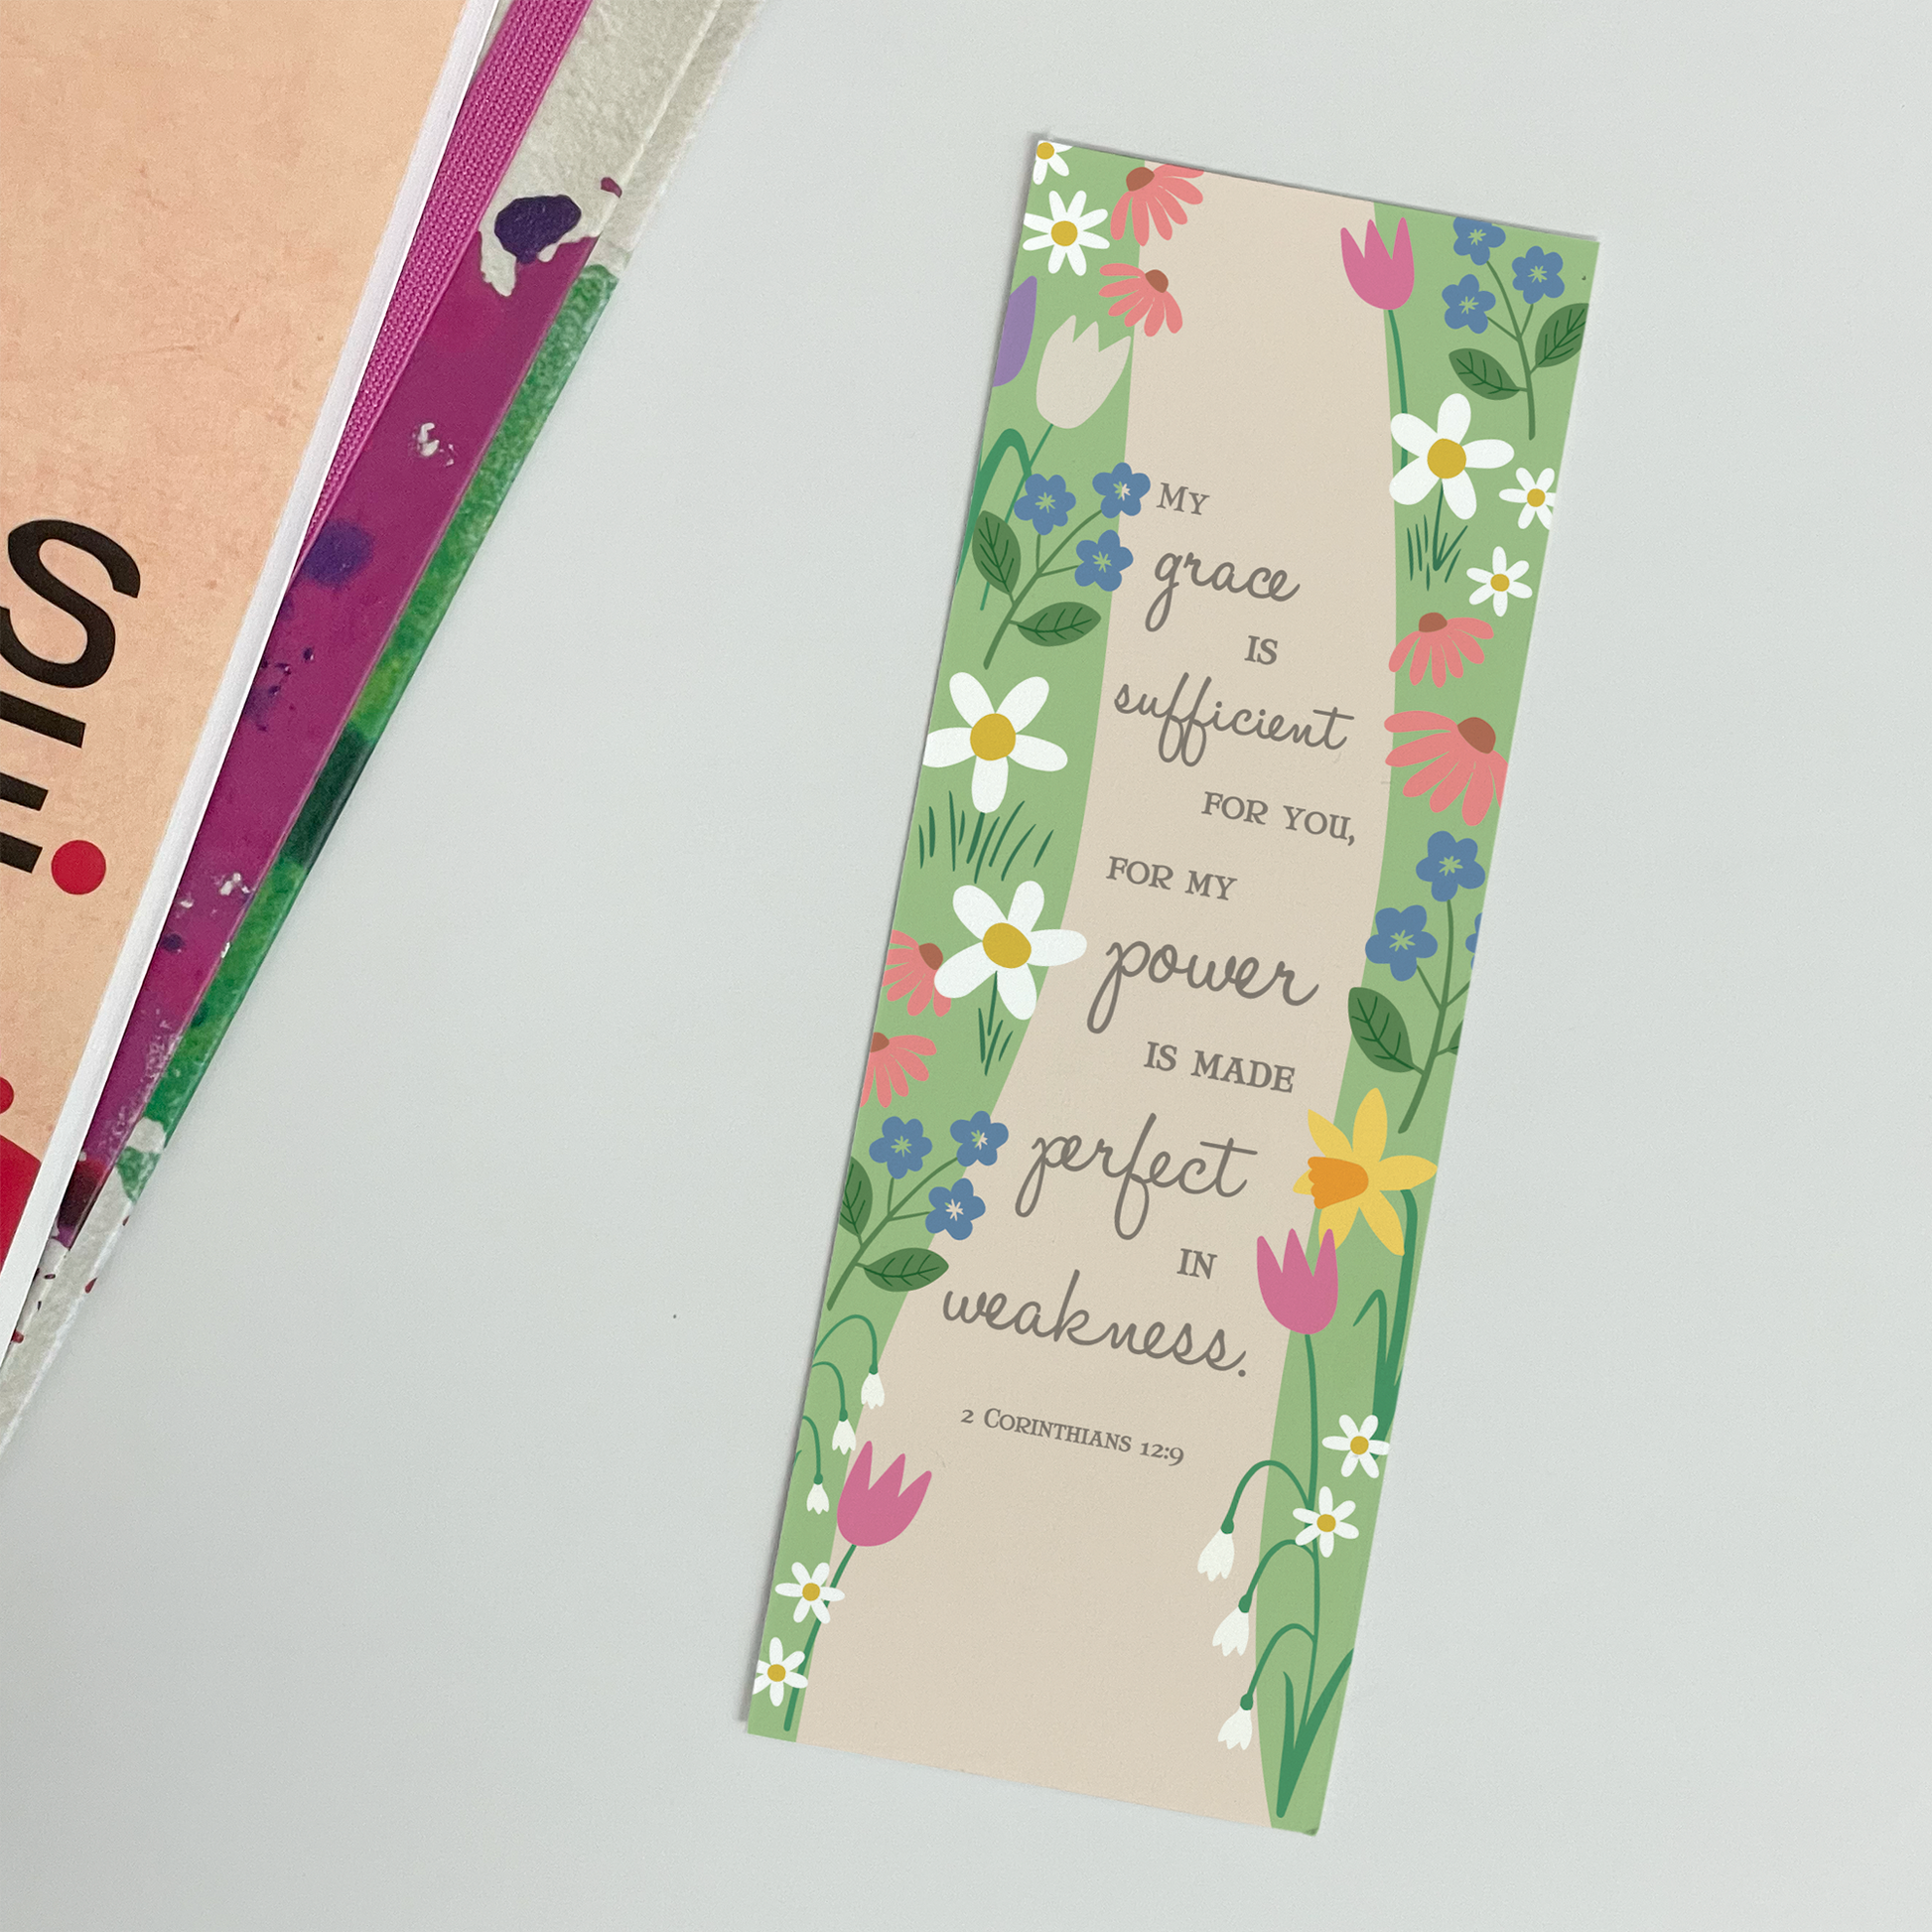 CHRISTIAN BOOKMARK GIFT - 2 CORINTHIANS 12:9 - THE WEE SPARROW